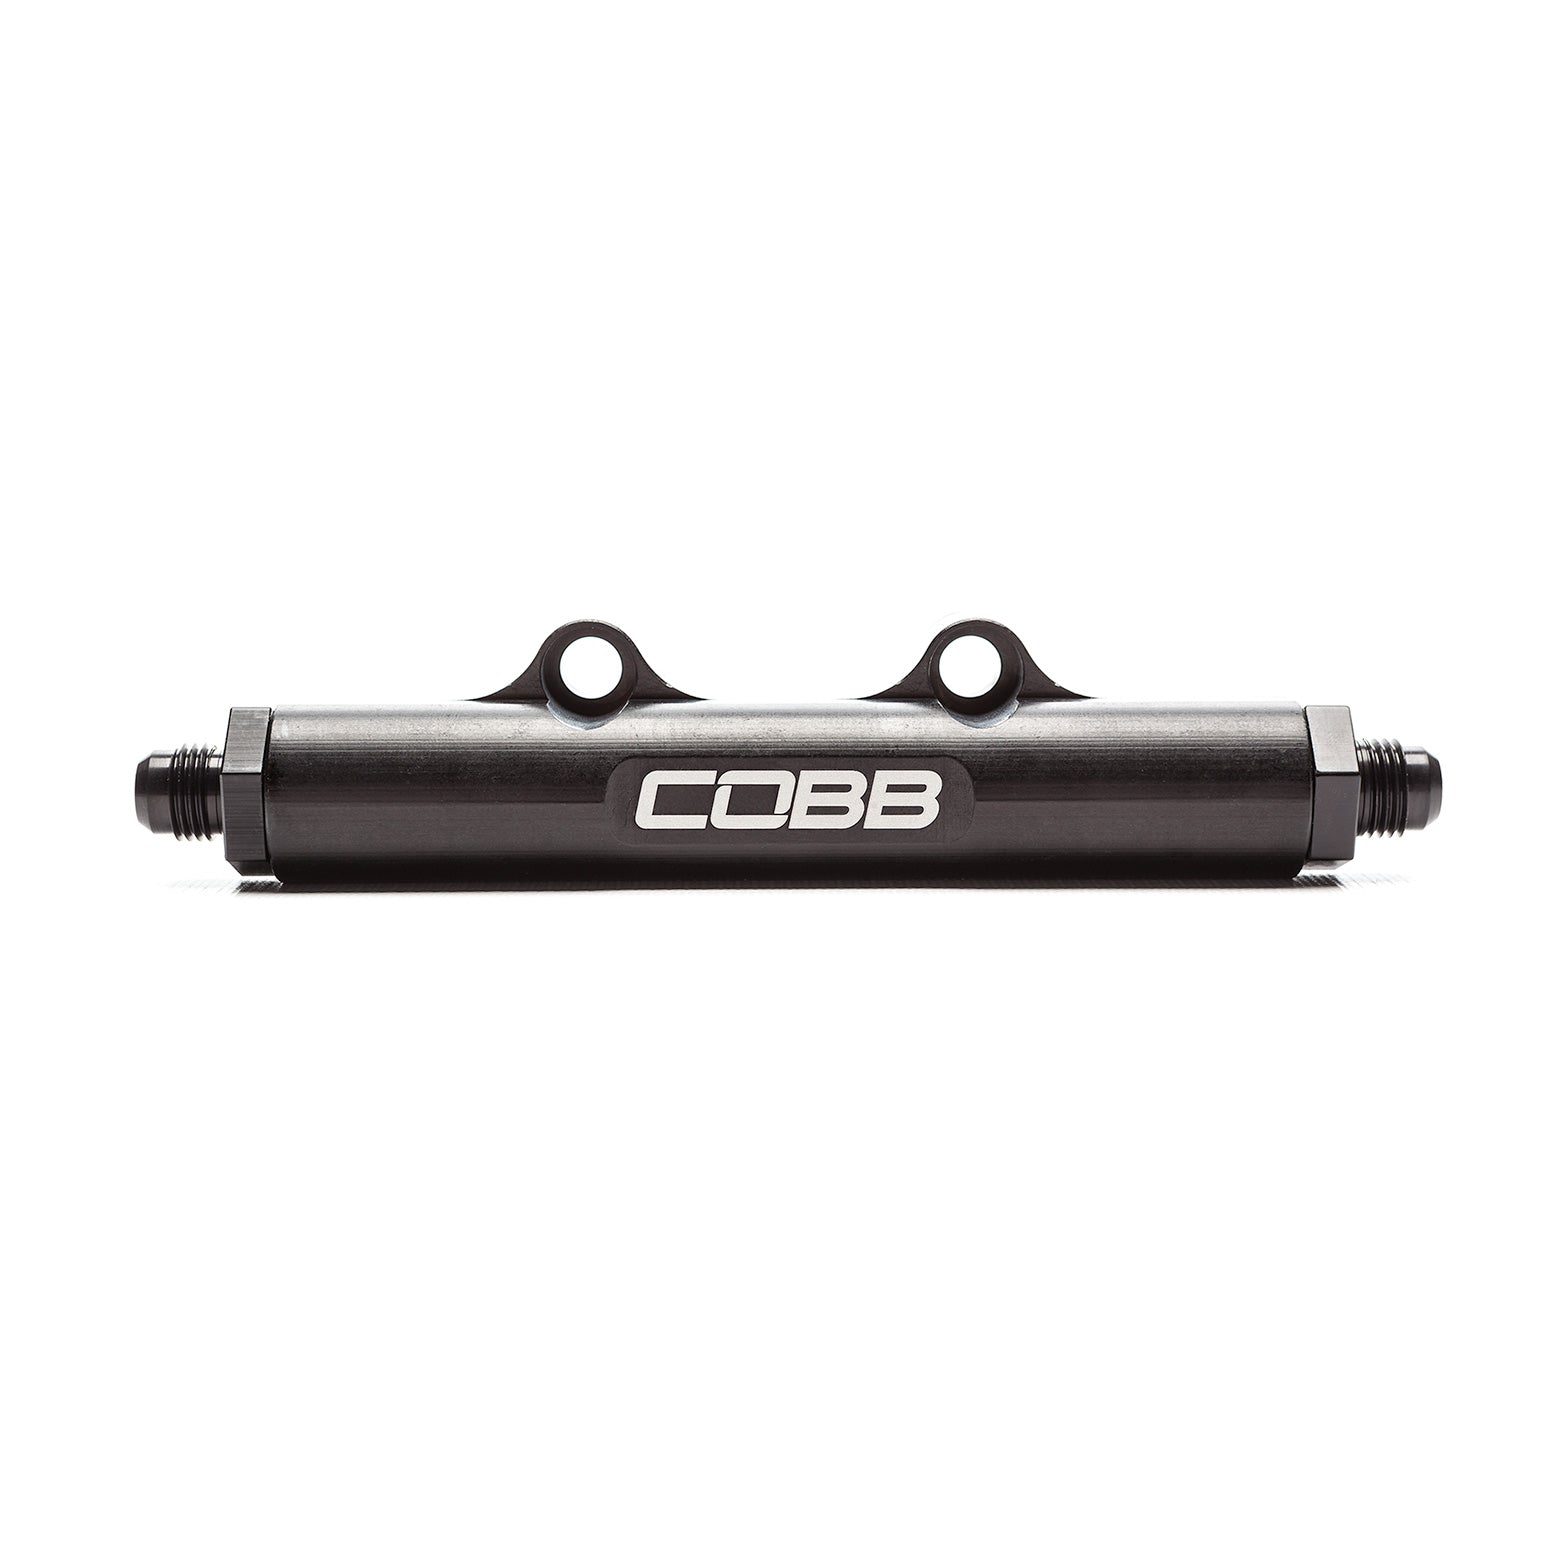 COBB 331260 SUBARU Side Feed to Top Feed Fuel Rail Conversion Kit with fittings STI 04-06, FXT 04-05, LGT 05-07 Photo-1 